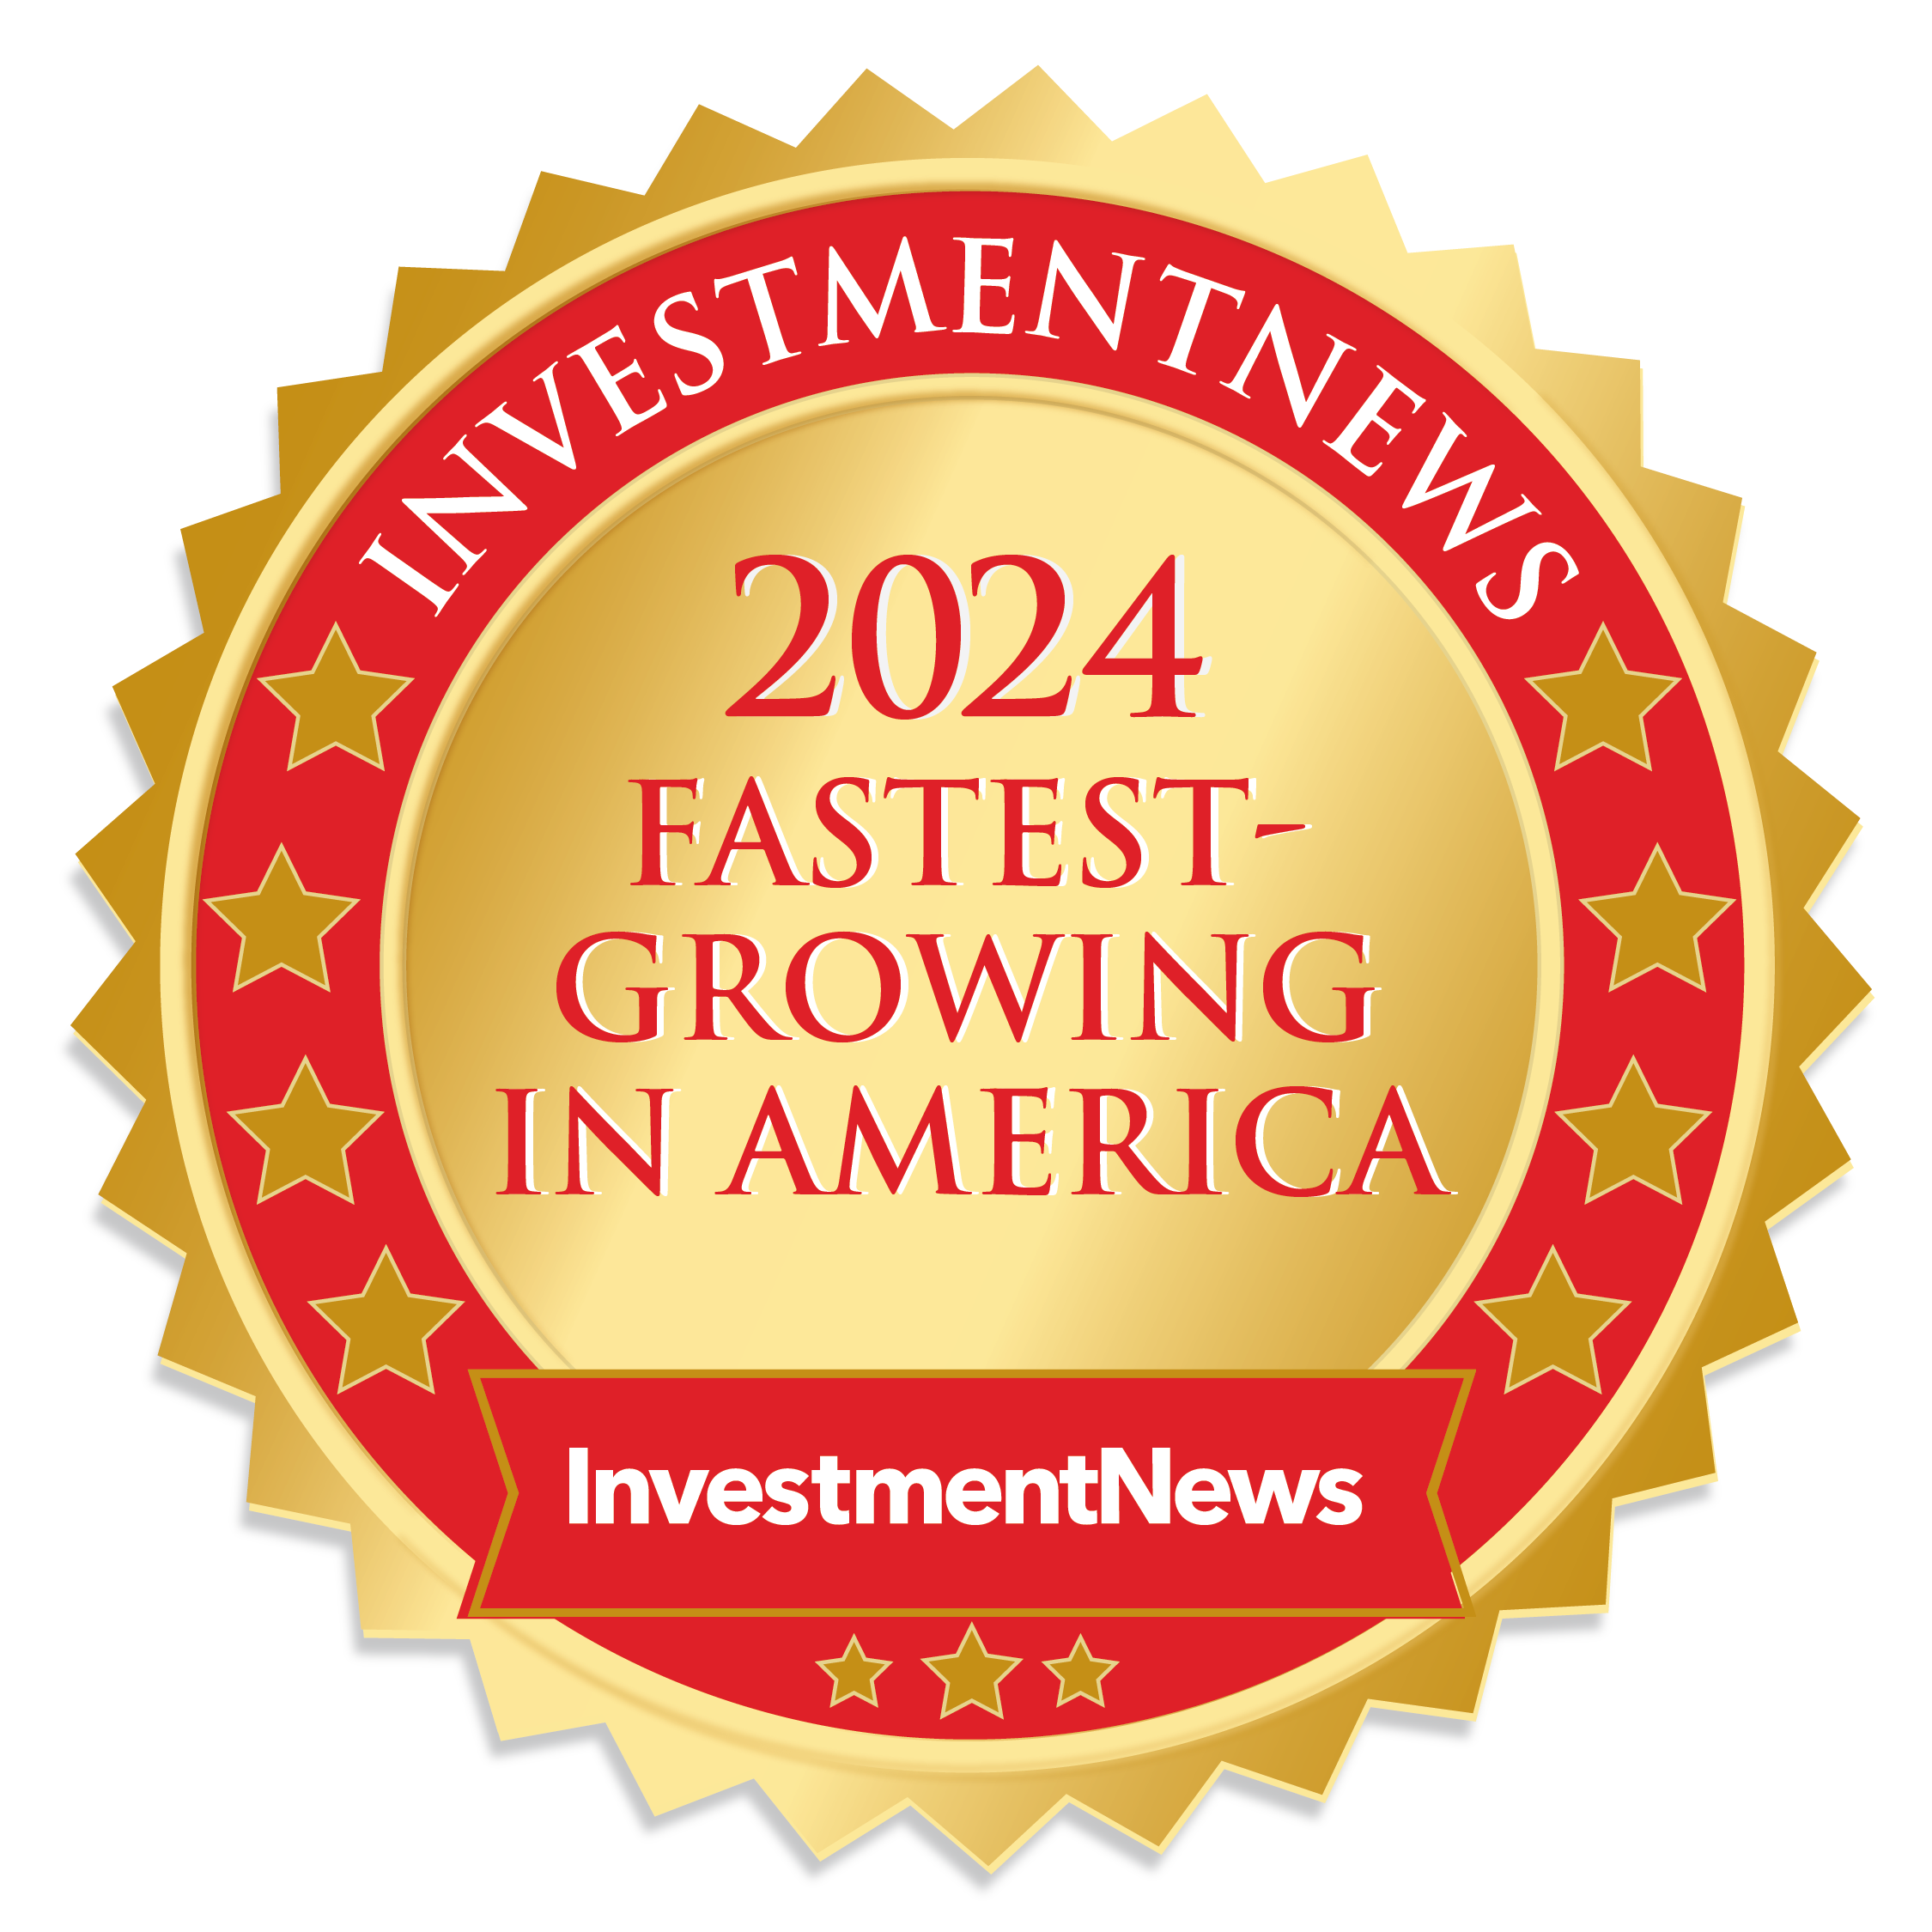 Fastest Growing in America - 2024